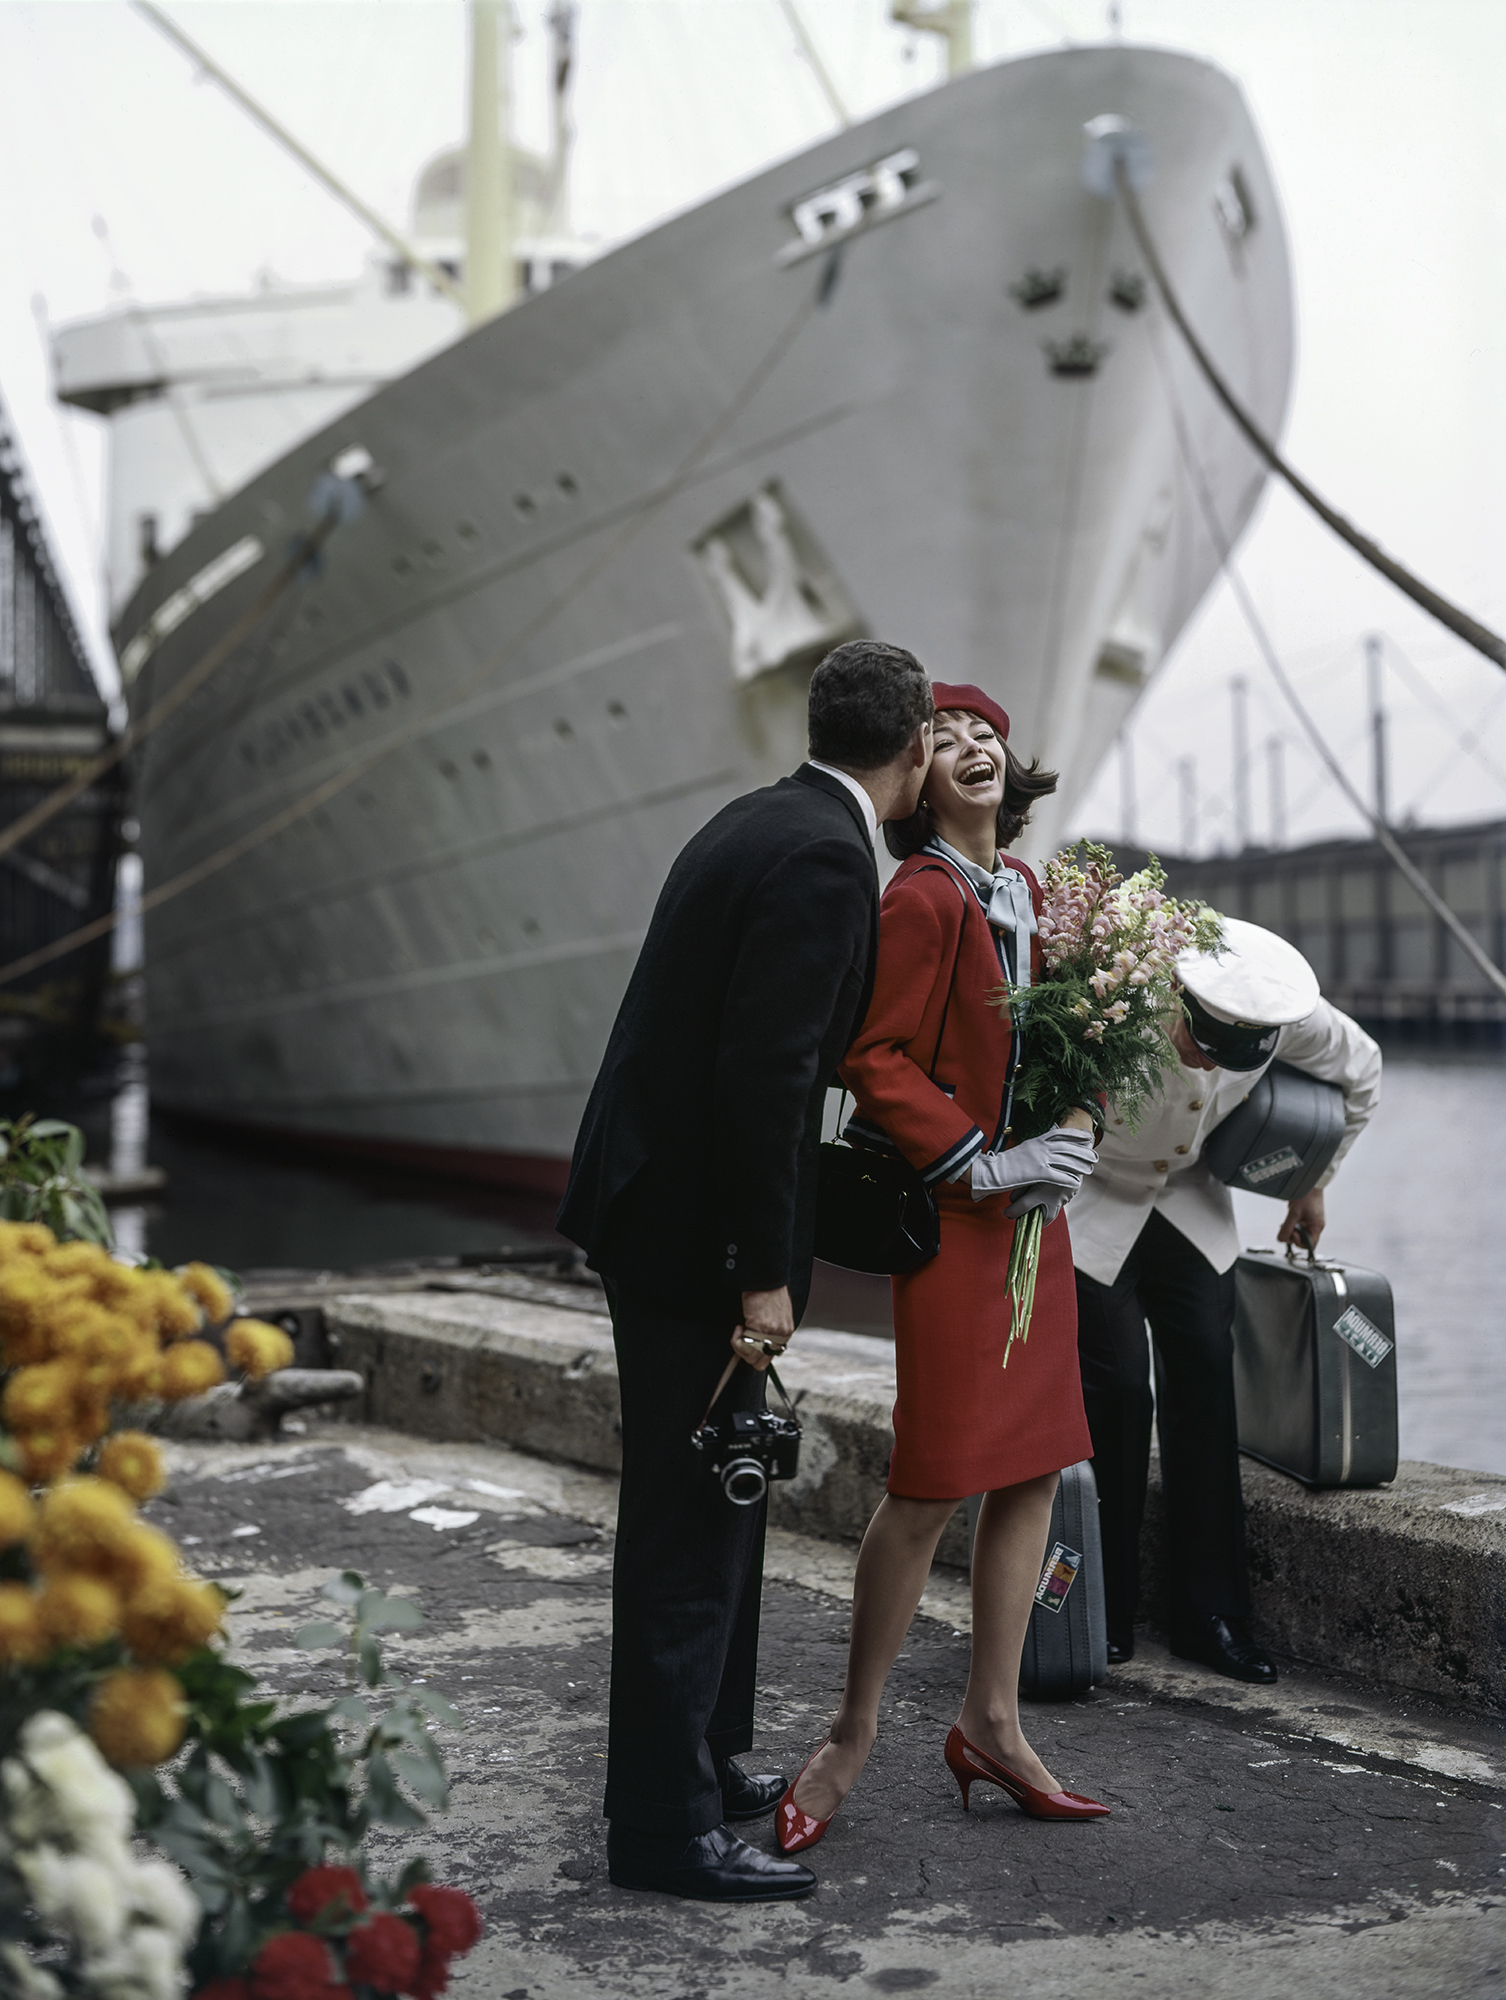 Fashion at the pier, c. 1950